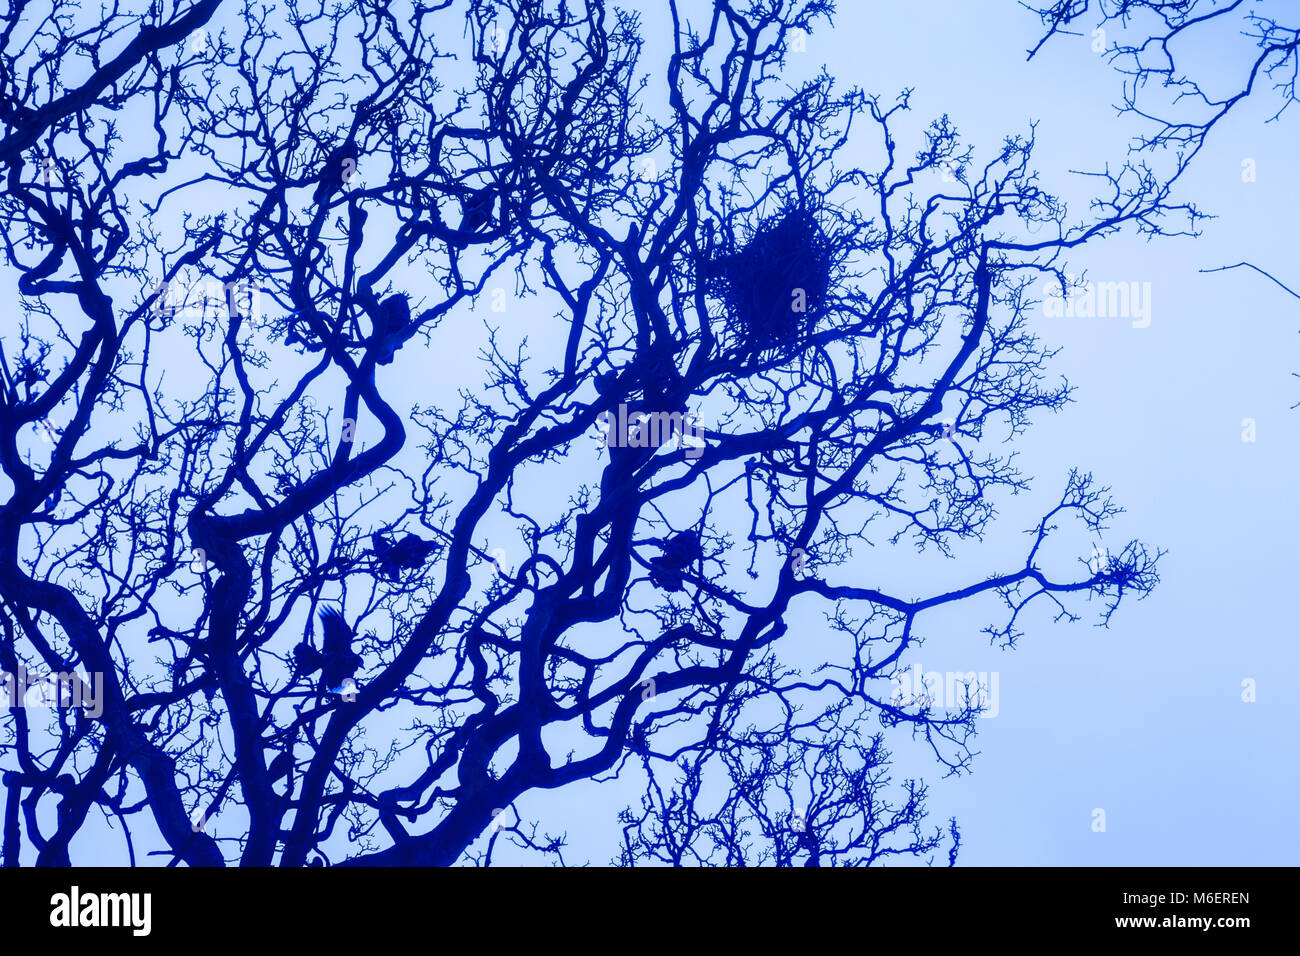 Spooky view of a ravens nest in oak trees with a blue and desolate atmosphere Stock Photo